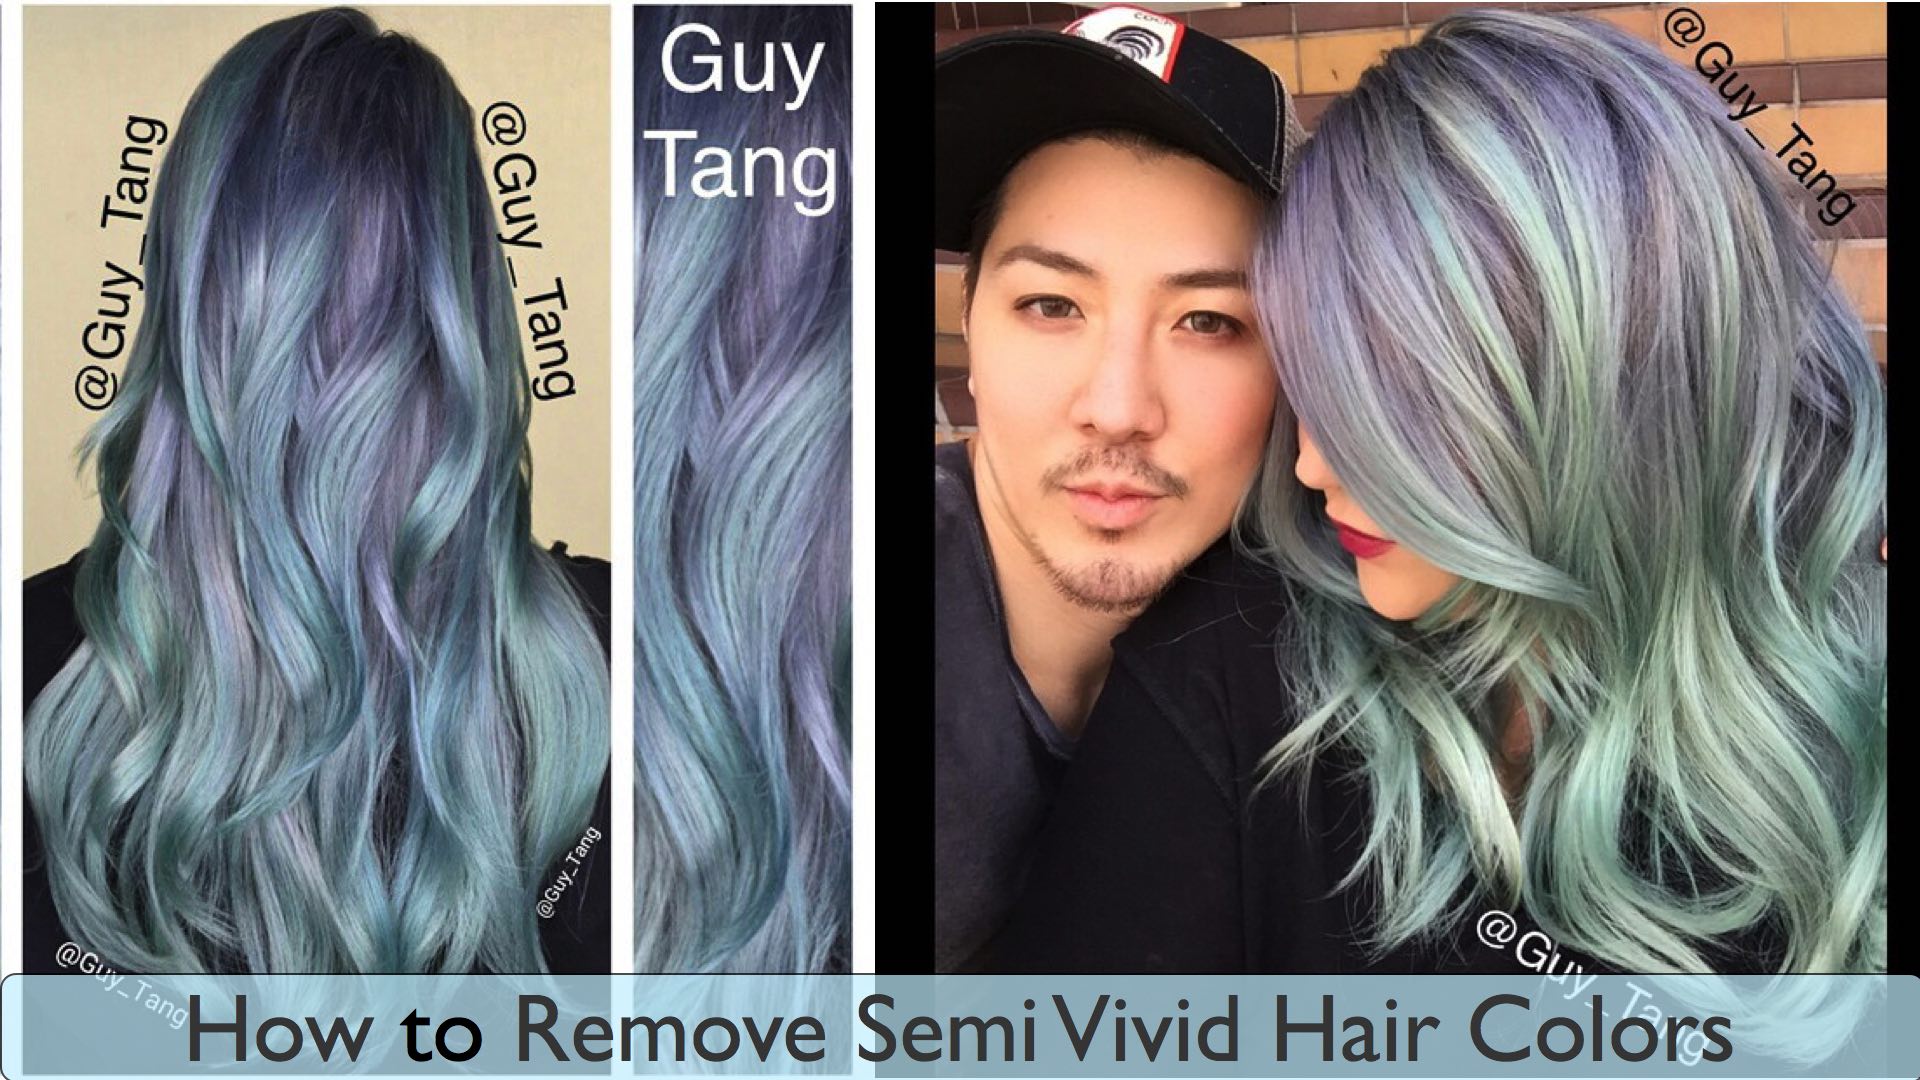 Guy Tang Hair Color | Galhairs